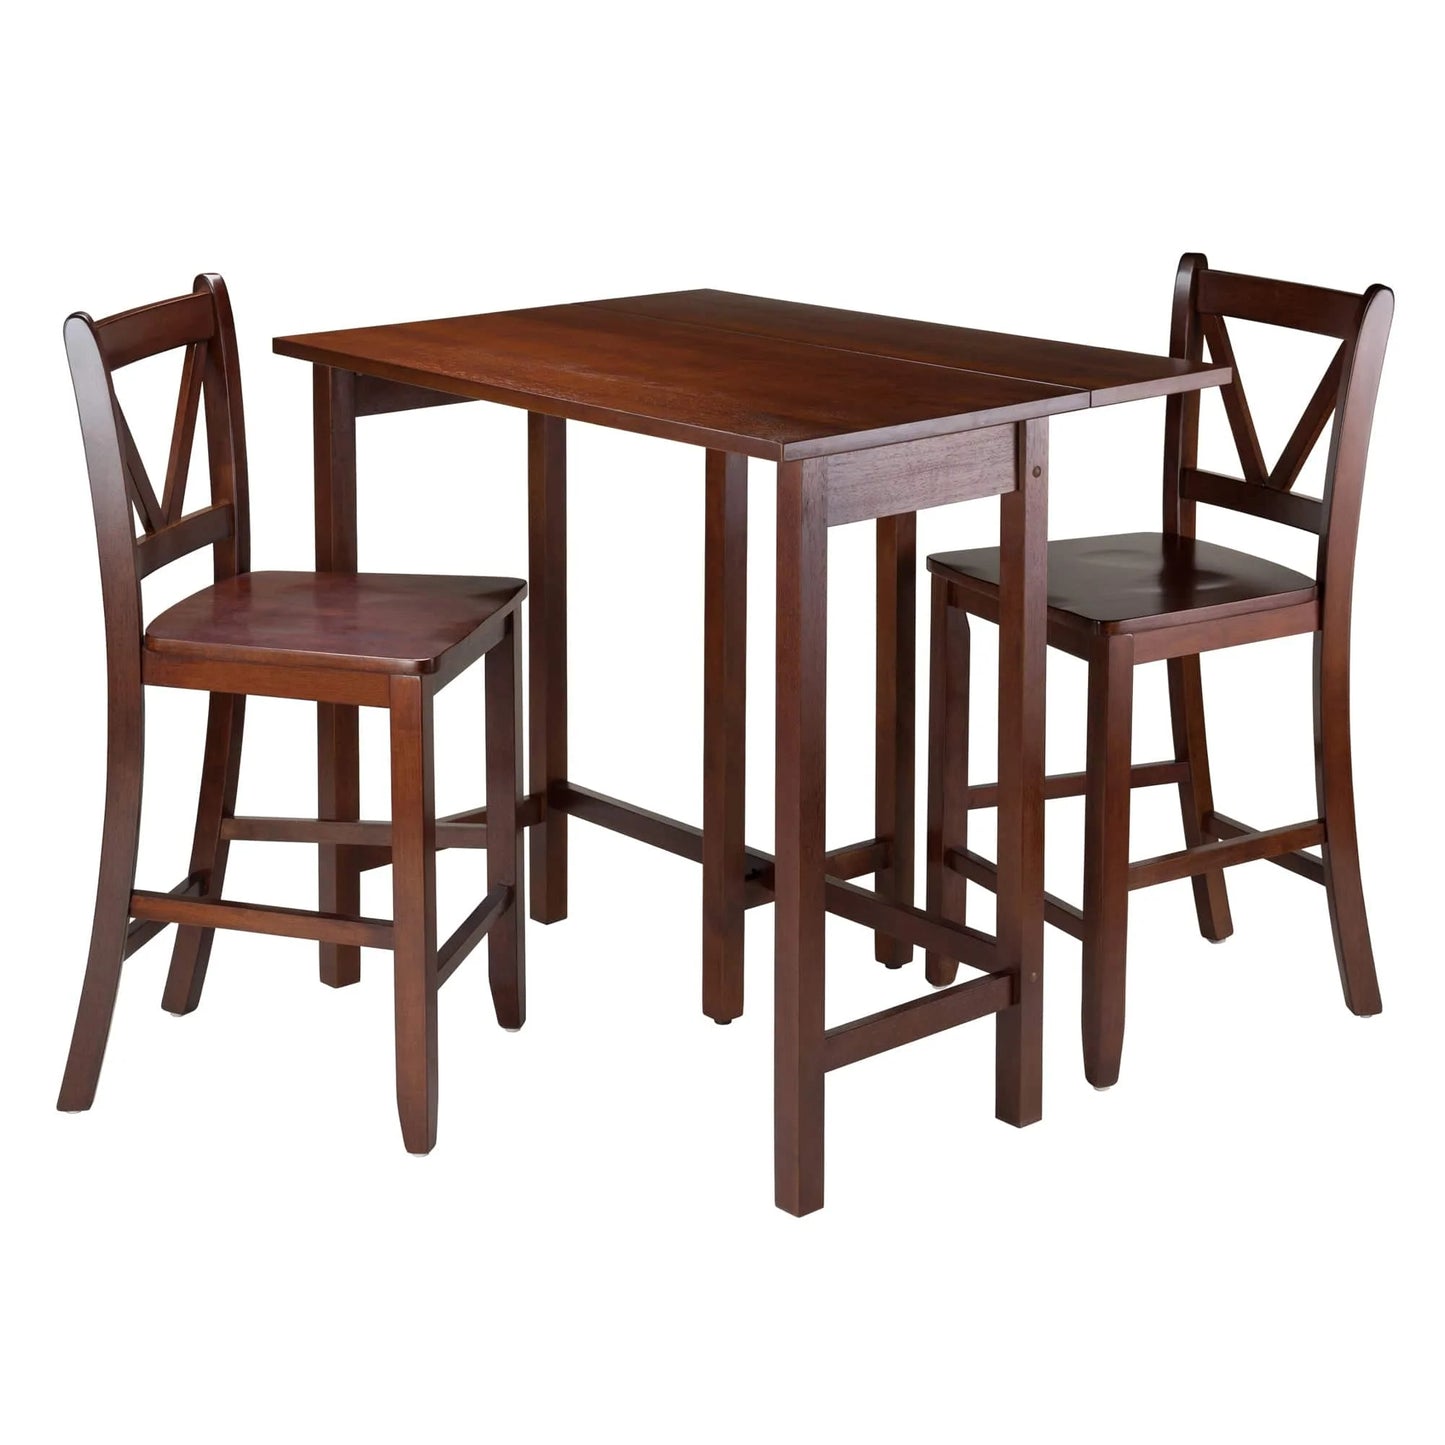 WINSOME Pub Table Set Lynnwood 3-Pc Drop Leaf Table with V-Back Counter Stools, Walnut